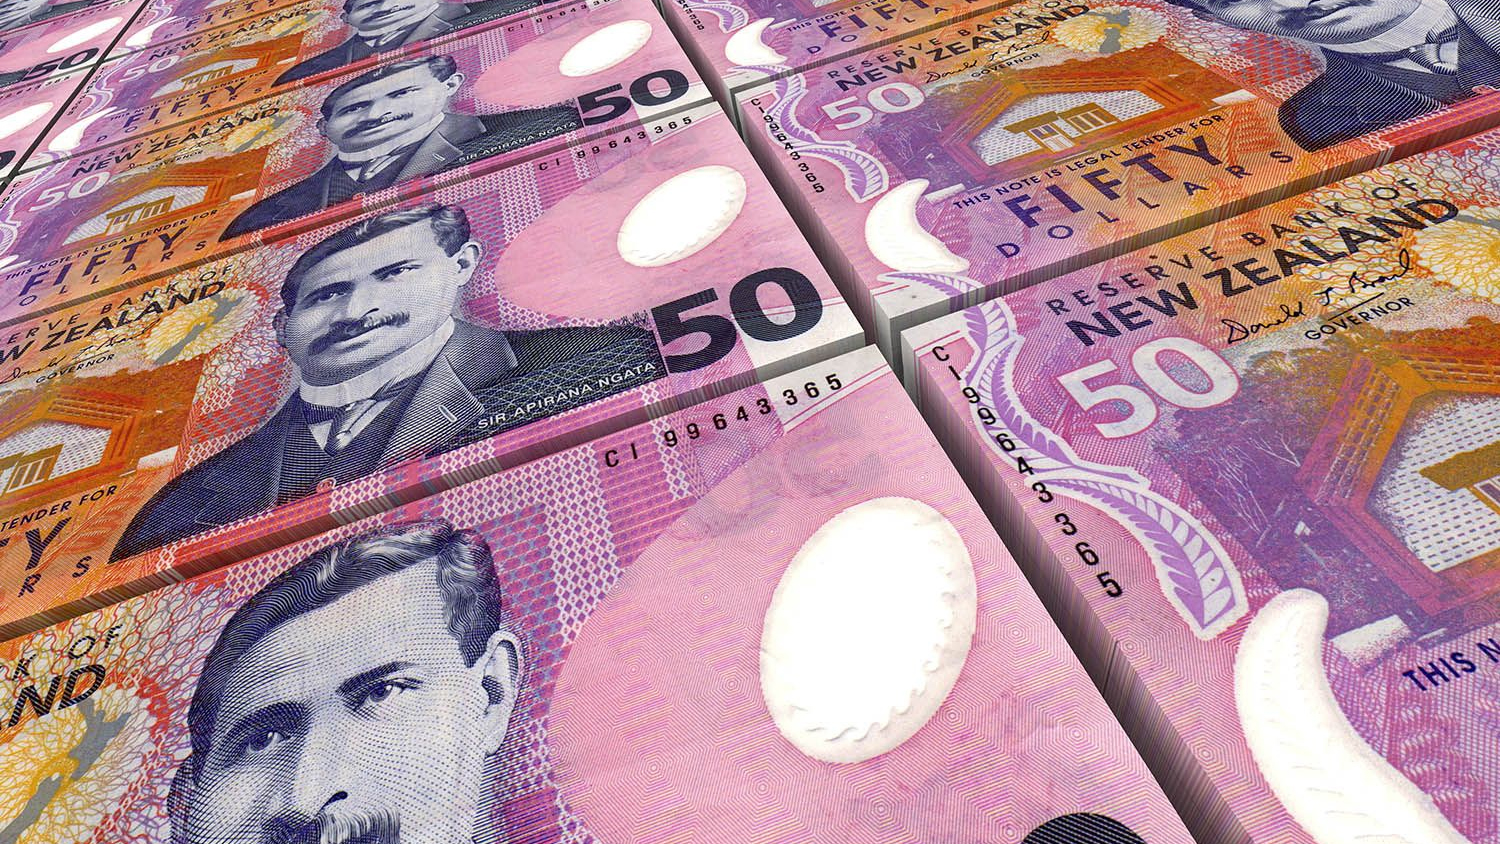 https://www.interest.co.nz/sites/default/files/feature_images/fifty-dollar-notes_2.jpg